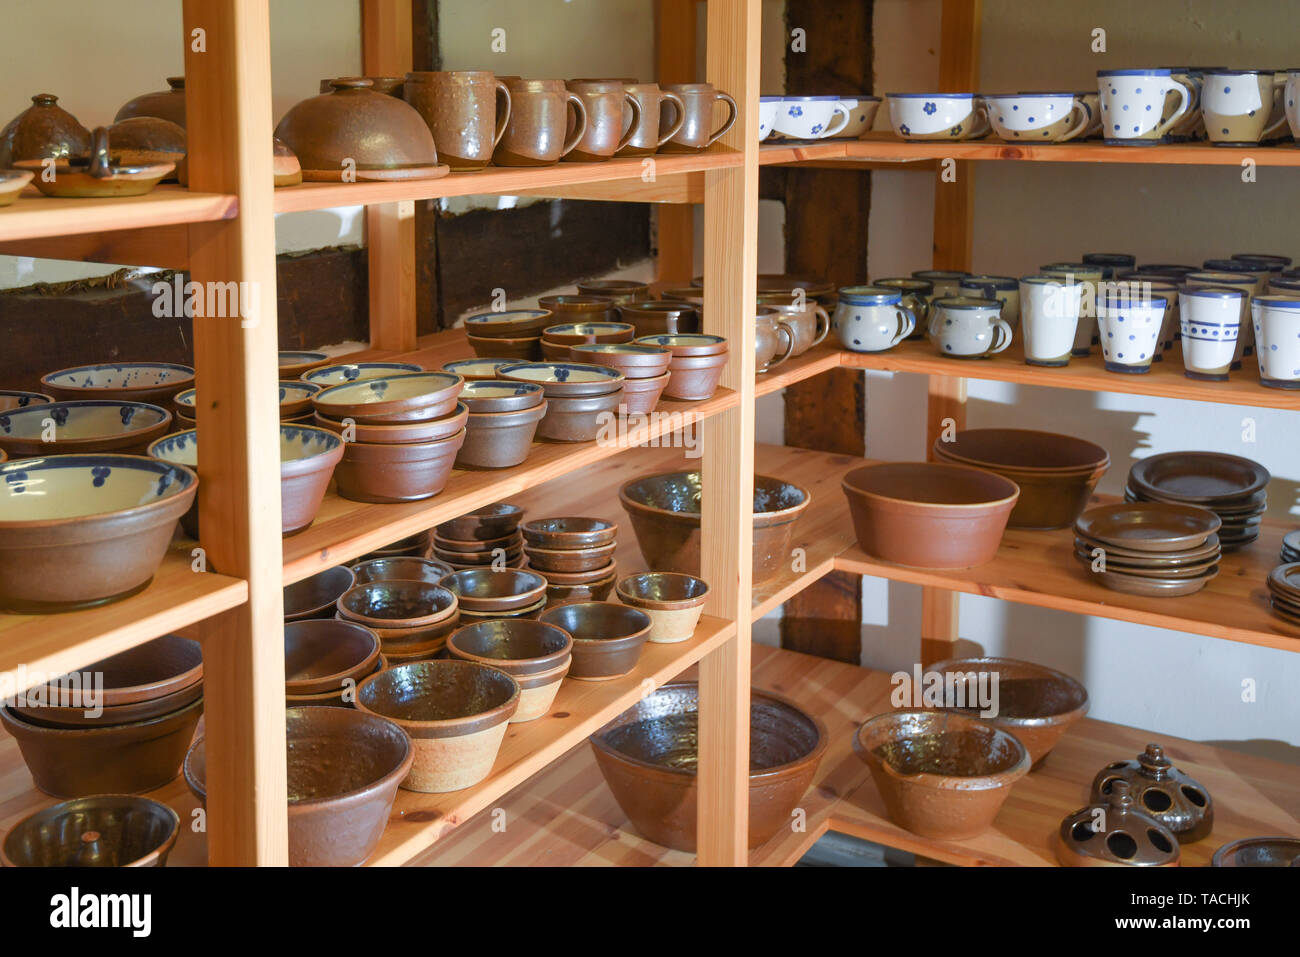 24 May 2019, Brandenburg, Groß Neuendorf: Jugs, cups and other vessels are on the shelves of the potter Manfred Dannegger. Since 1997 the potter has been producing this clay glazed stoneware in the tradition of Bunzlau brownware. The dishes are fired in the oven at about 1300 degrees Celsius for about 20 hours. The oven must then cool for four days. This weekend (25.05./26.05.) the 12th pottery market will take place in Groß Neuendorf. Then 22 potters from near and far present themselves directly at the dike of the German-Polish border river Oder. Photo: Patrick Pleul/dpa-Zentralbild/ZB Stock Photo